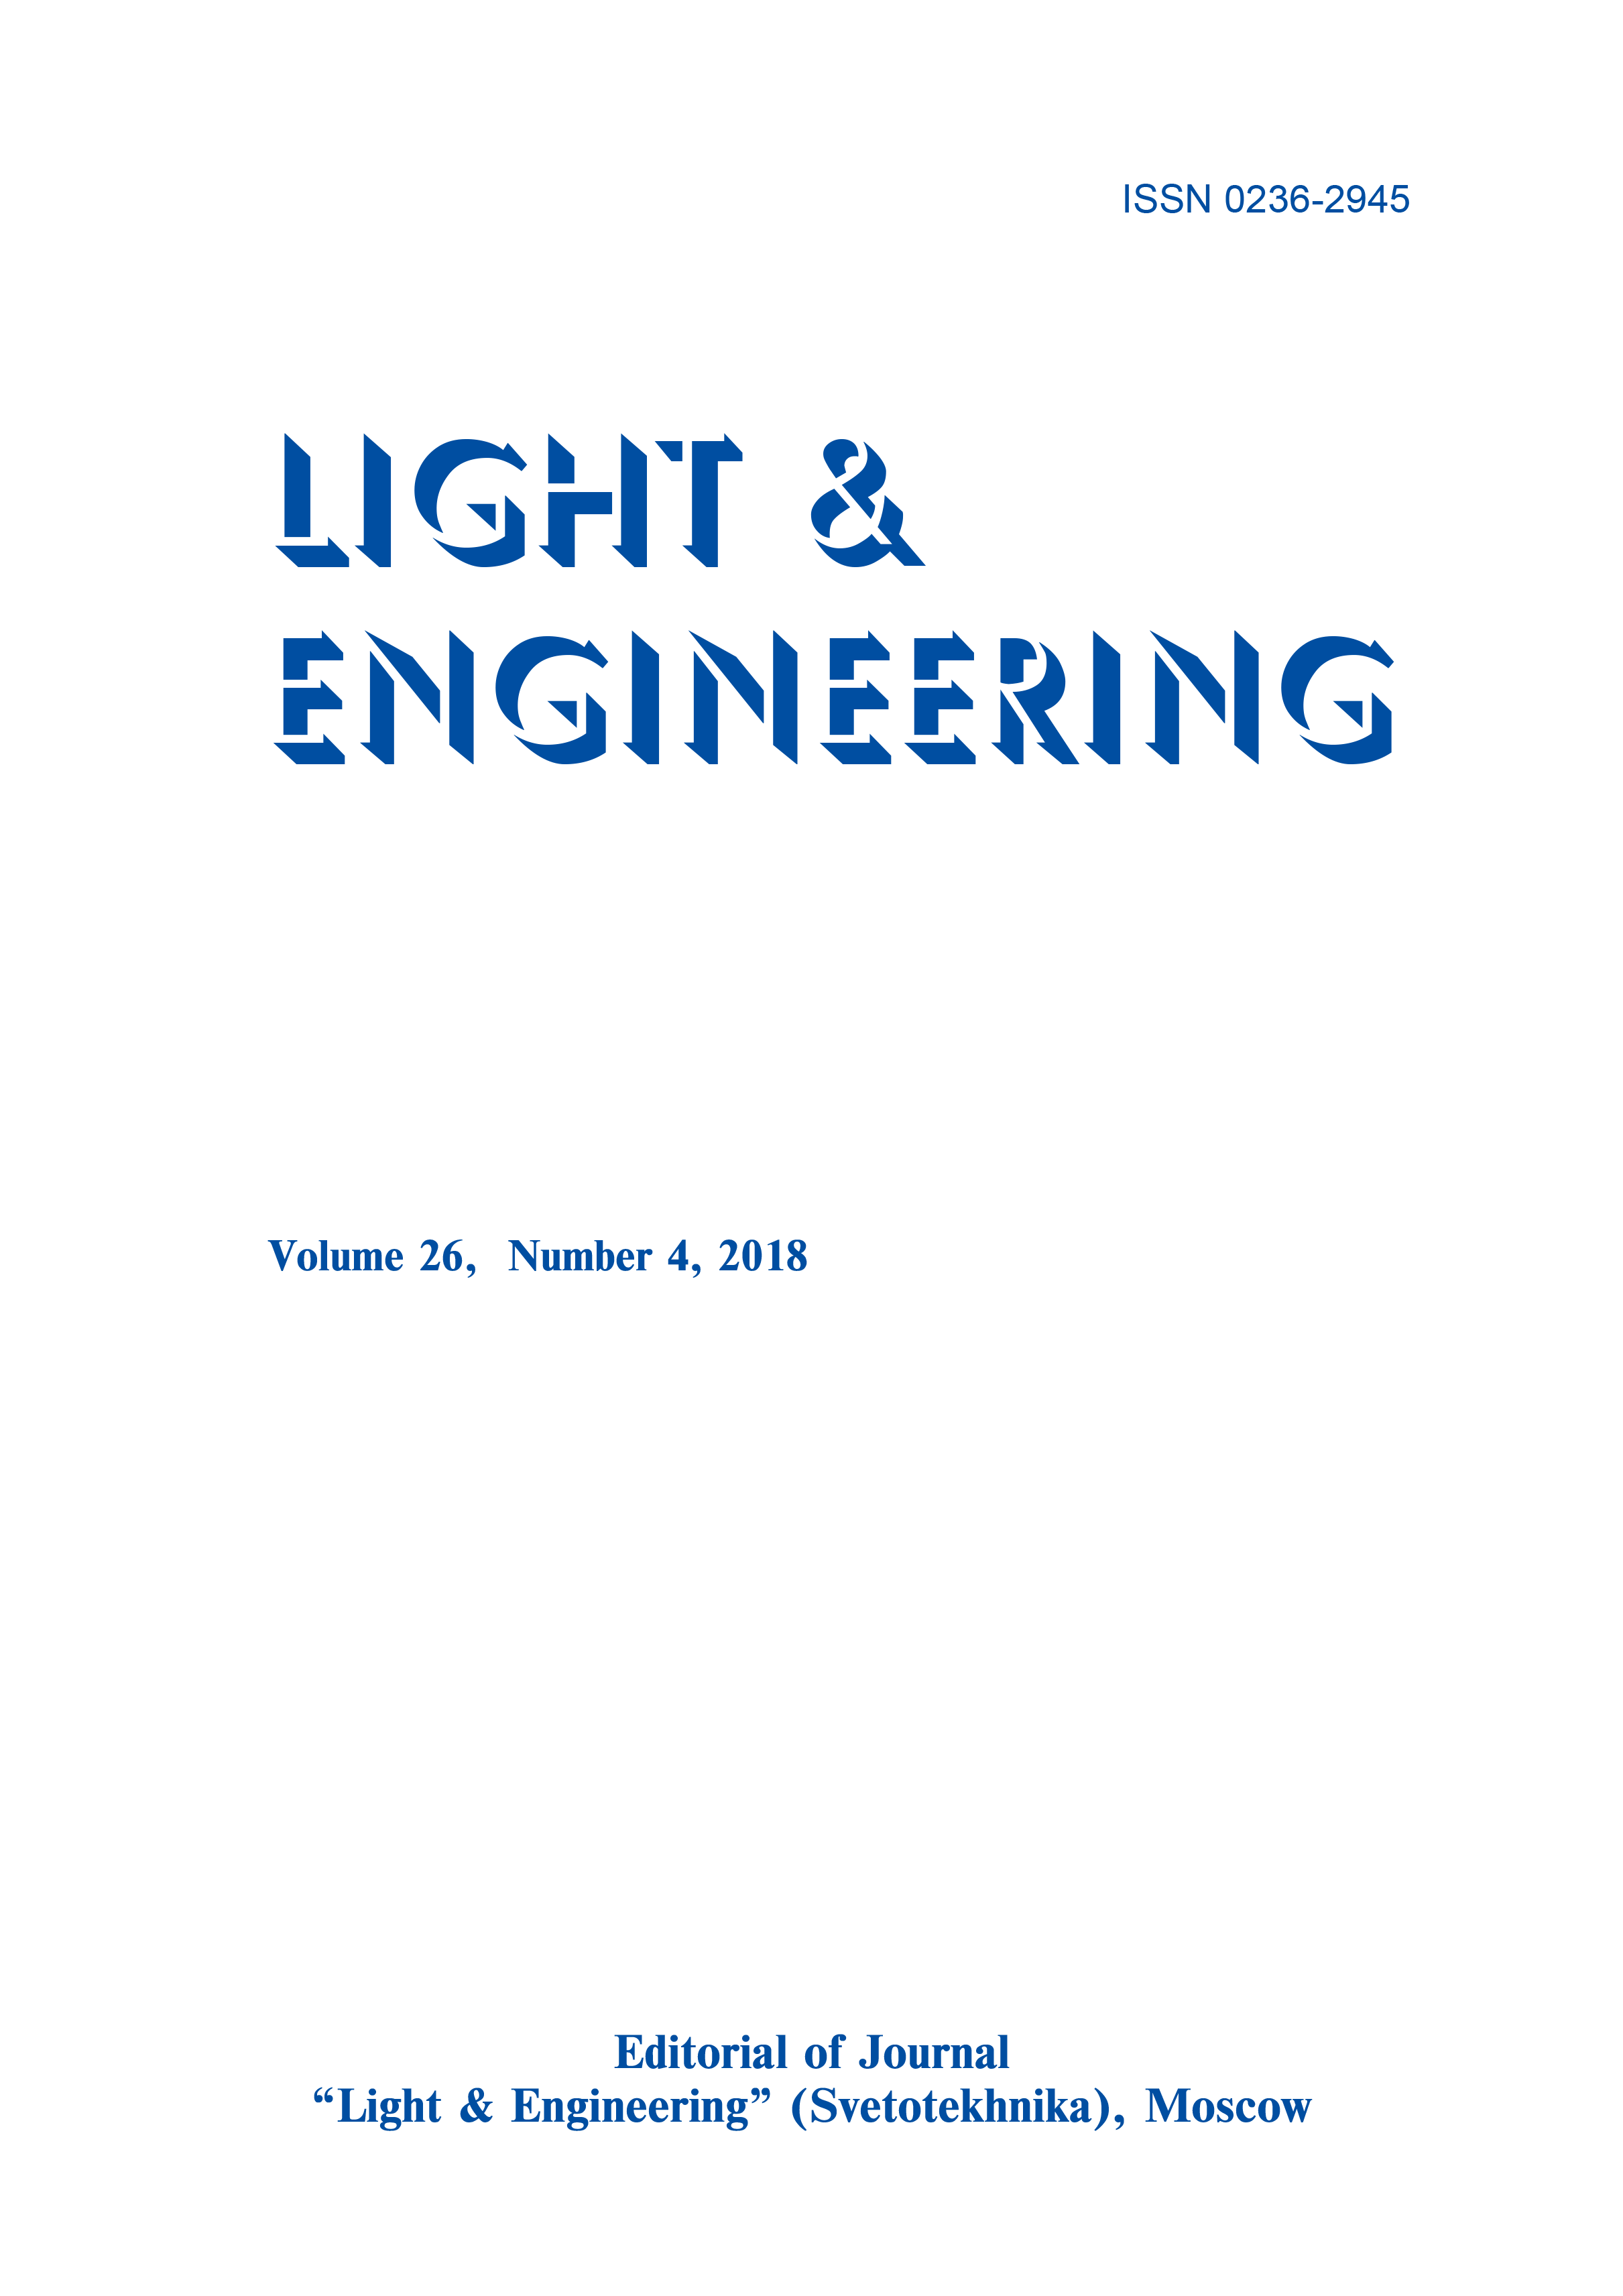 Influence of Climatic Conditions of Russia and the Countries of the Near East on Lighting Equipment. L&E 26 (4) 2018